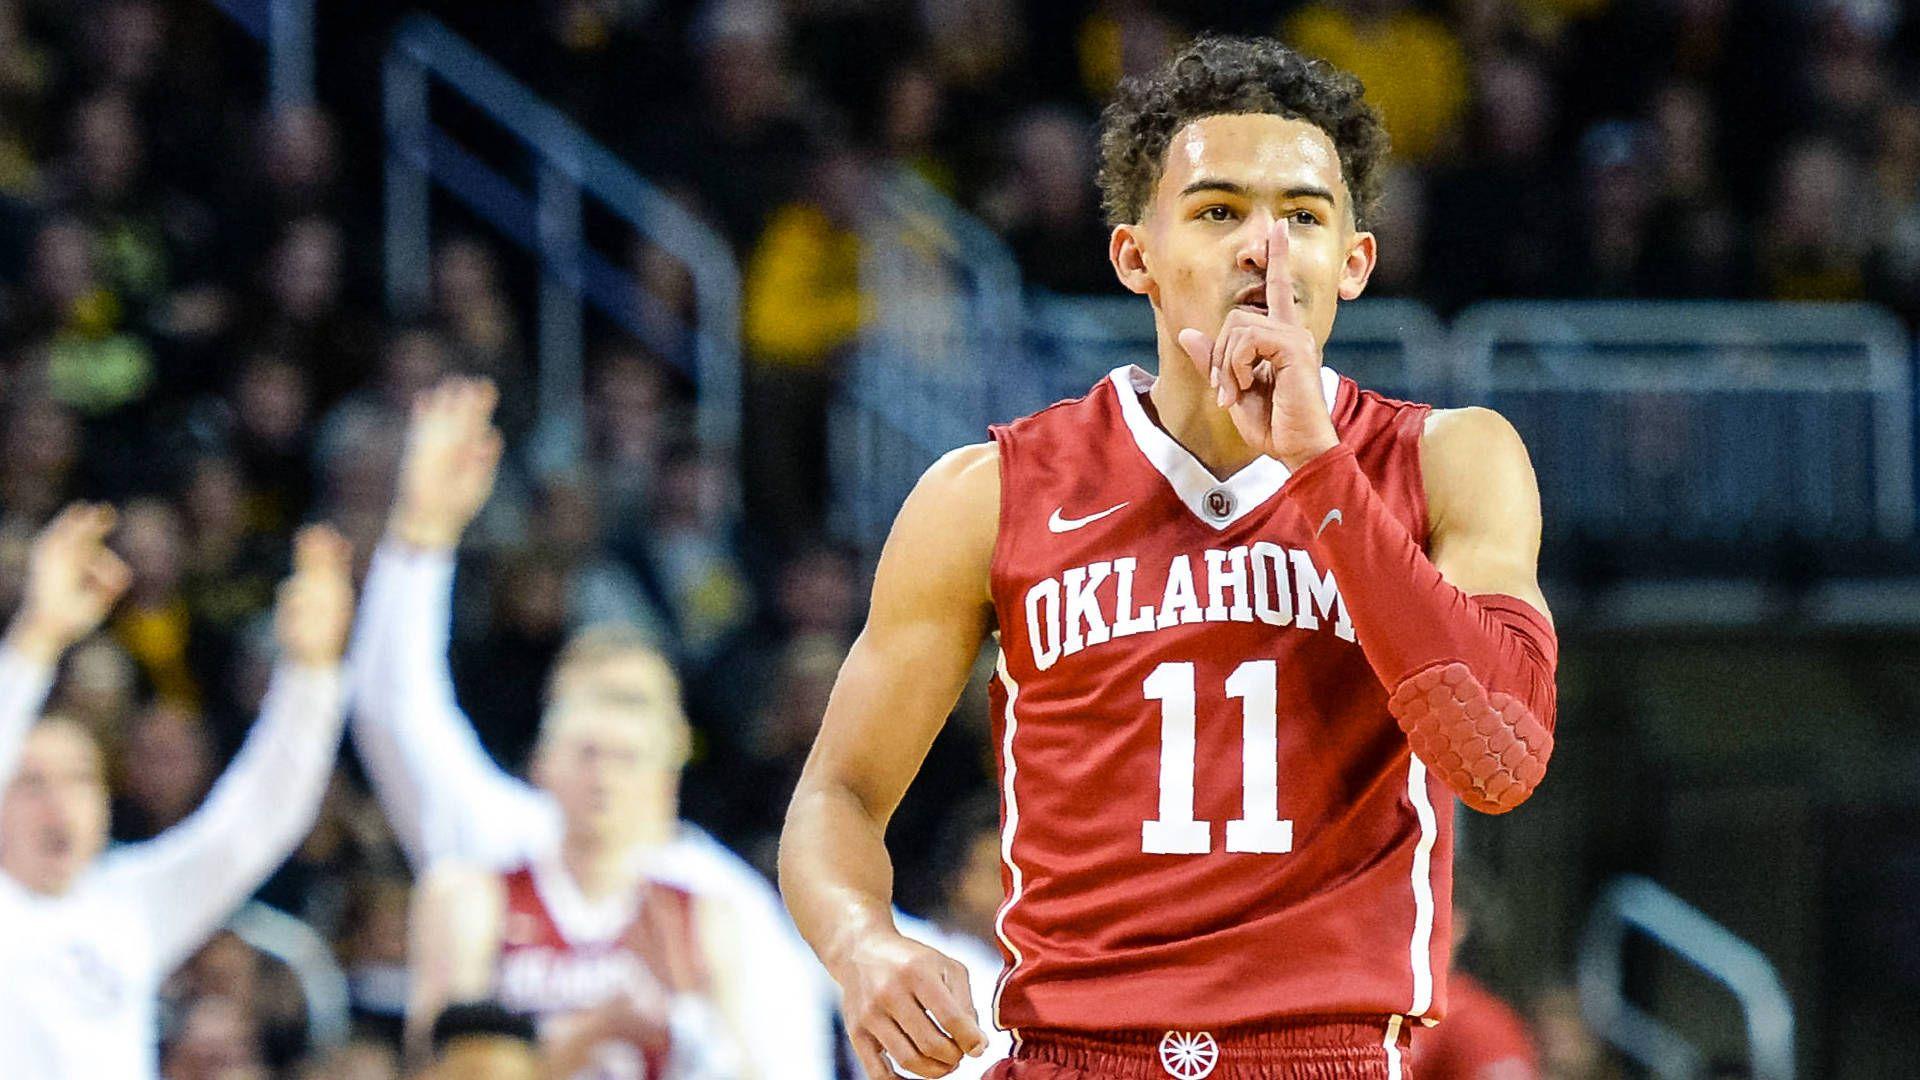 Sooners Shock No. 3 Wichita State Official Site of Oklahoma